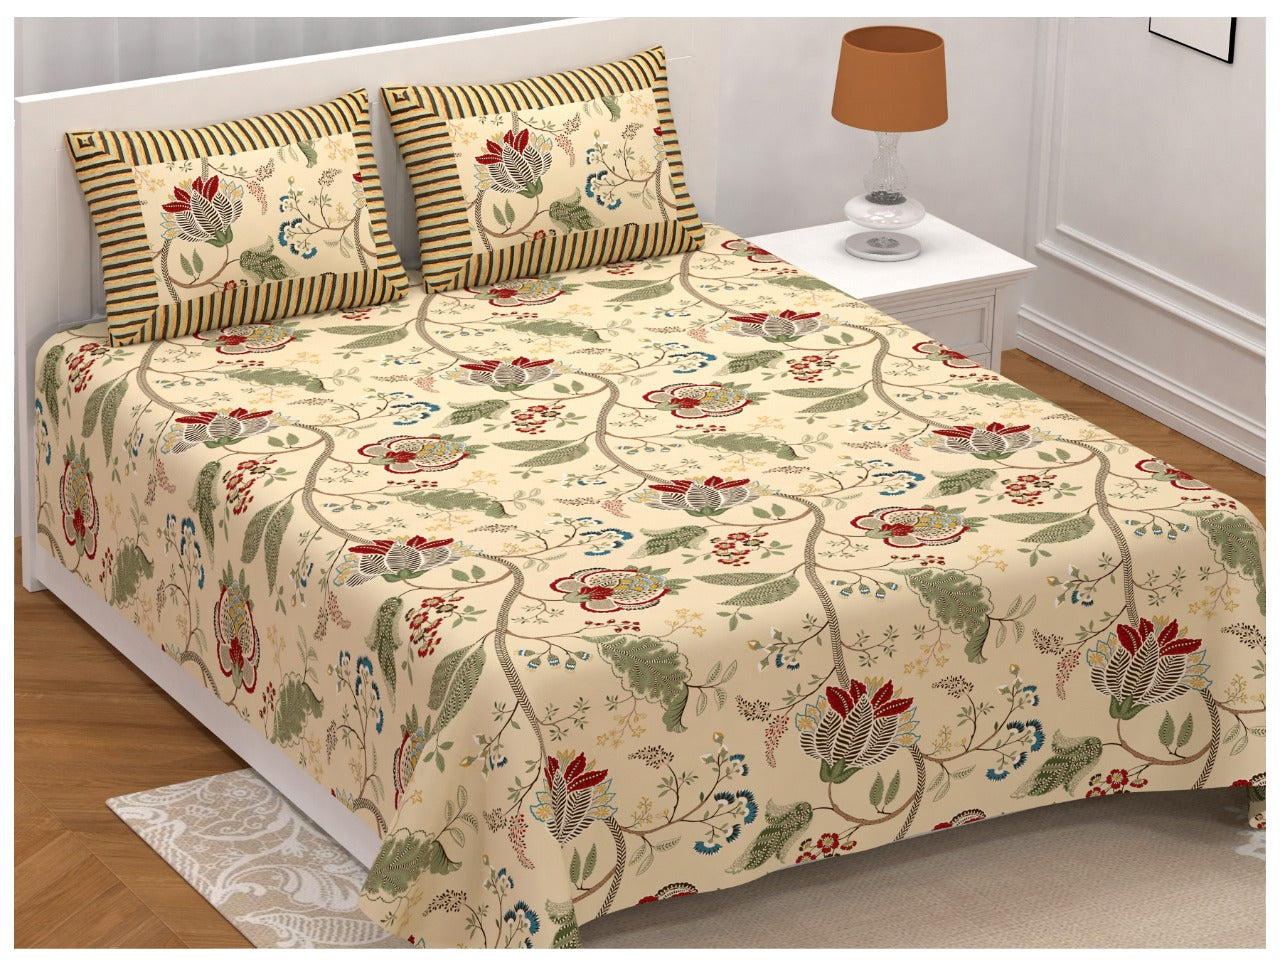 100% Pure Cotton King Size Double Bedsheet With 2 Pillow Covers ( 100 X 108 Inches ) - JBNBK42